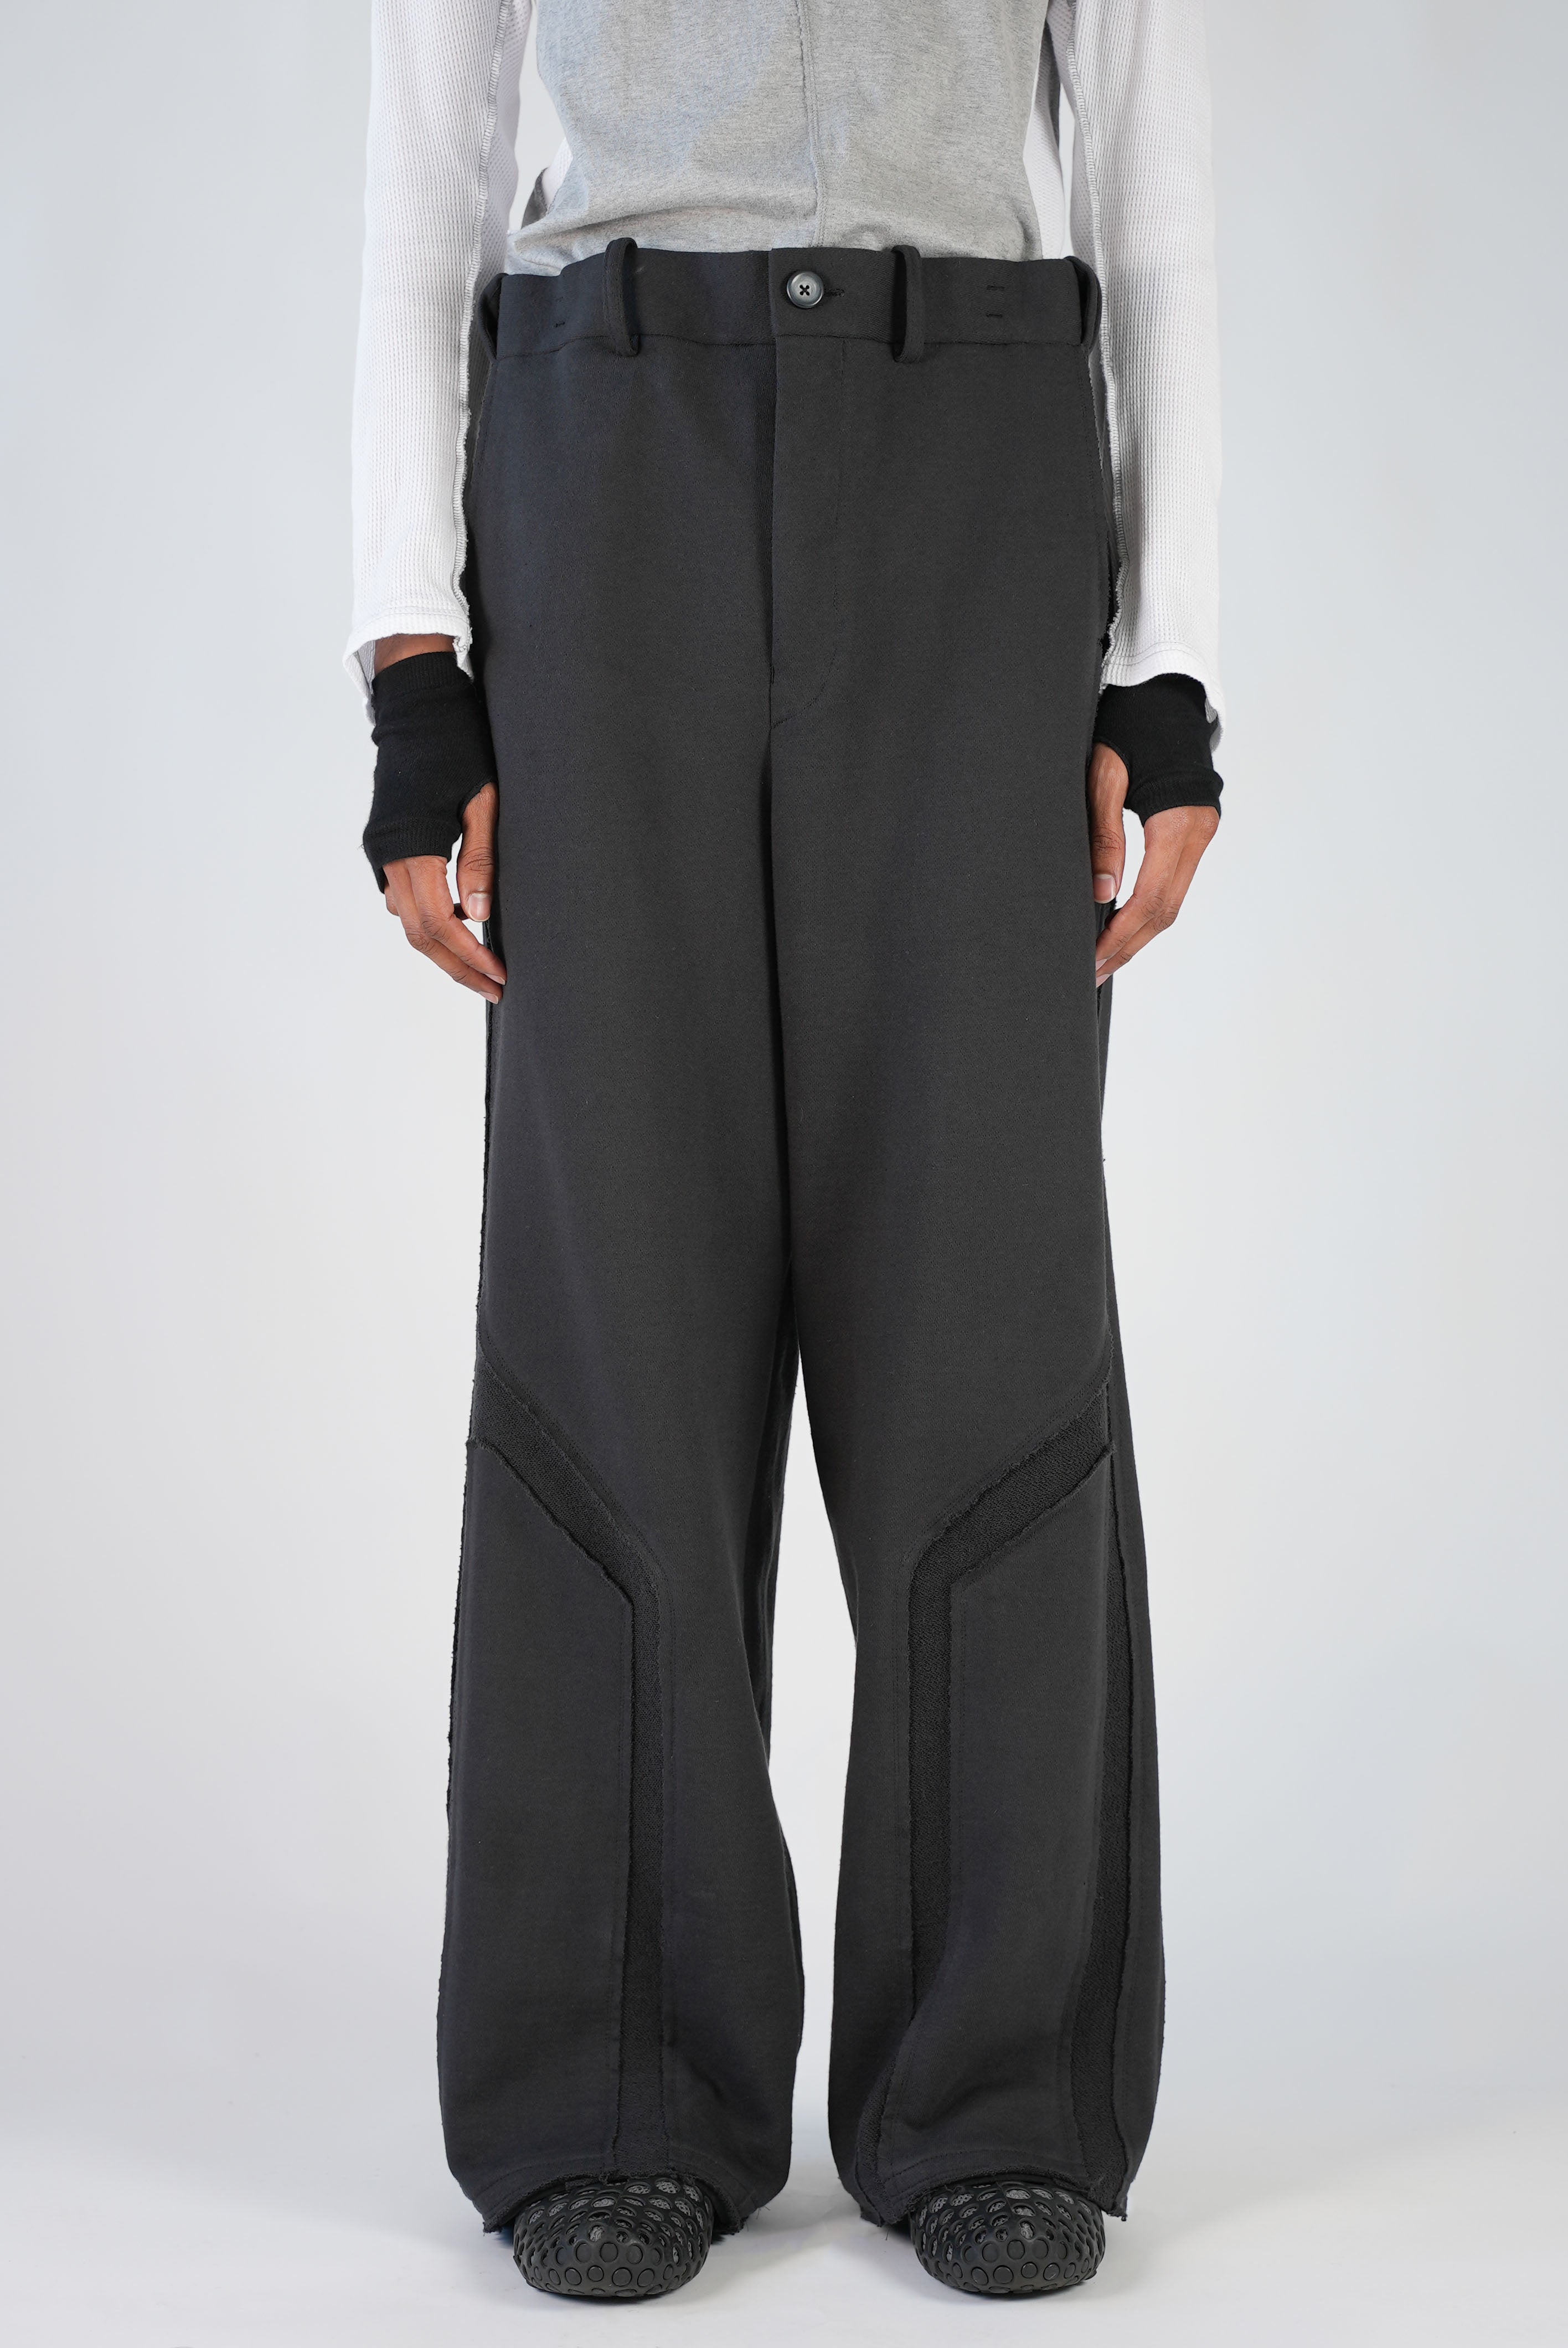 STRONG 004 TROUSERS (BLACK)